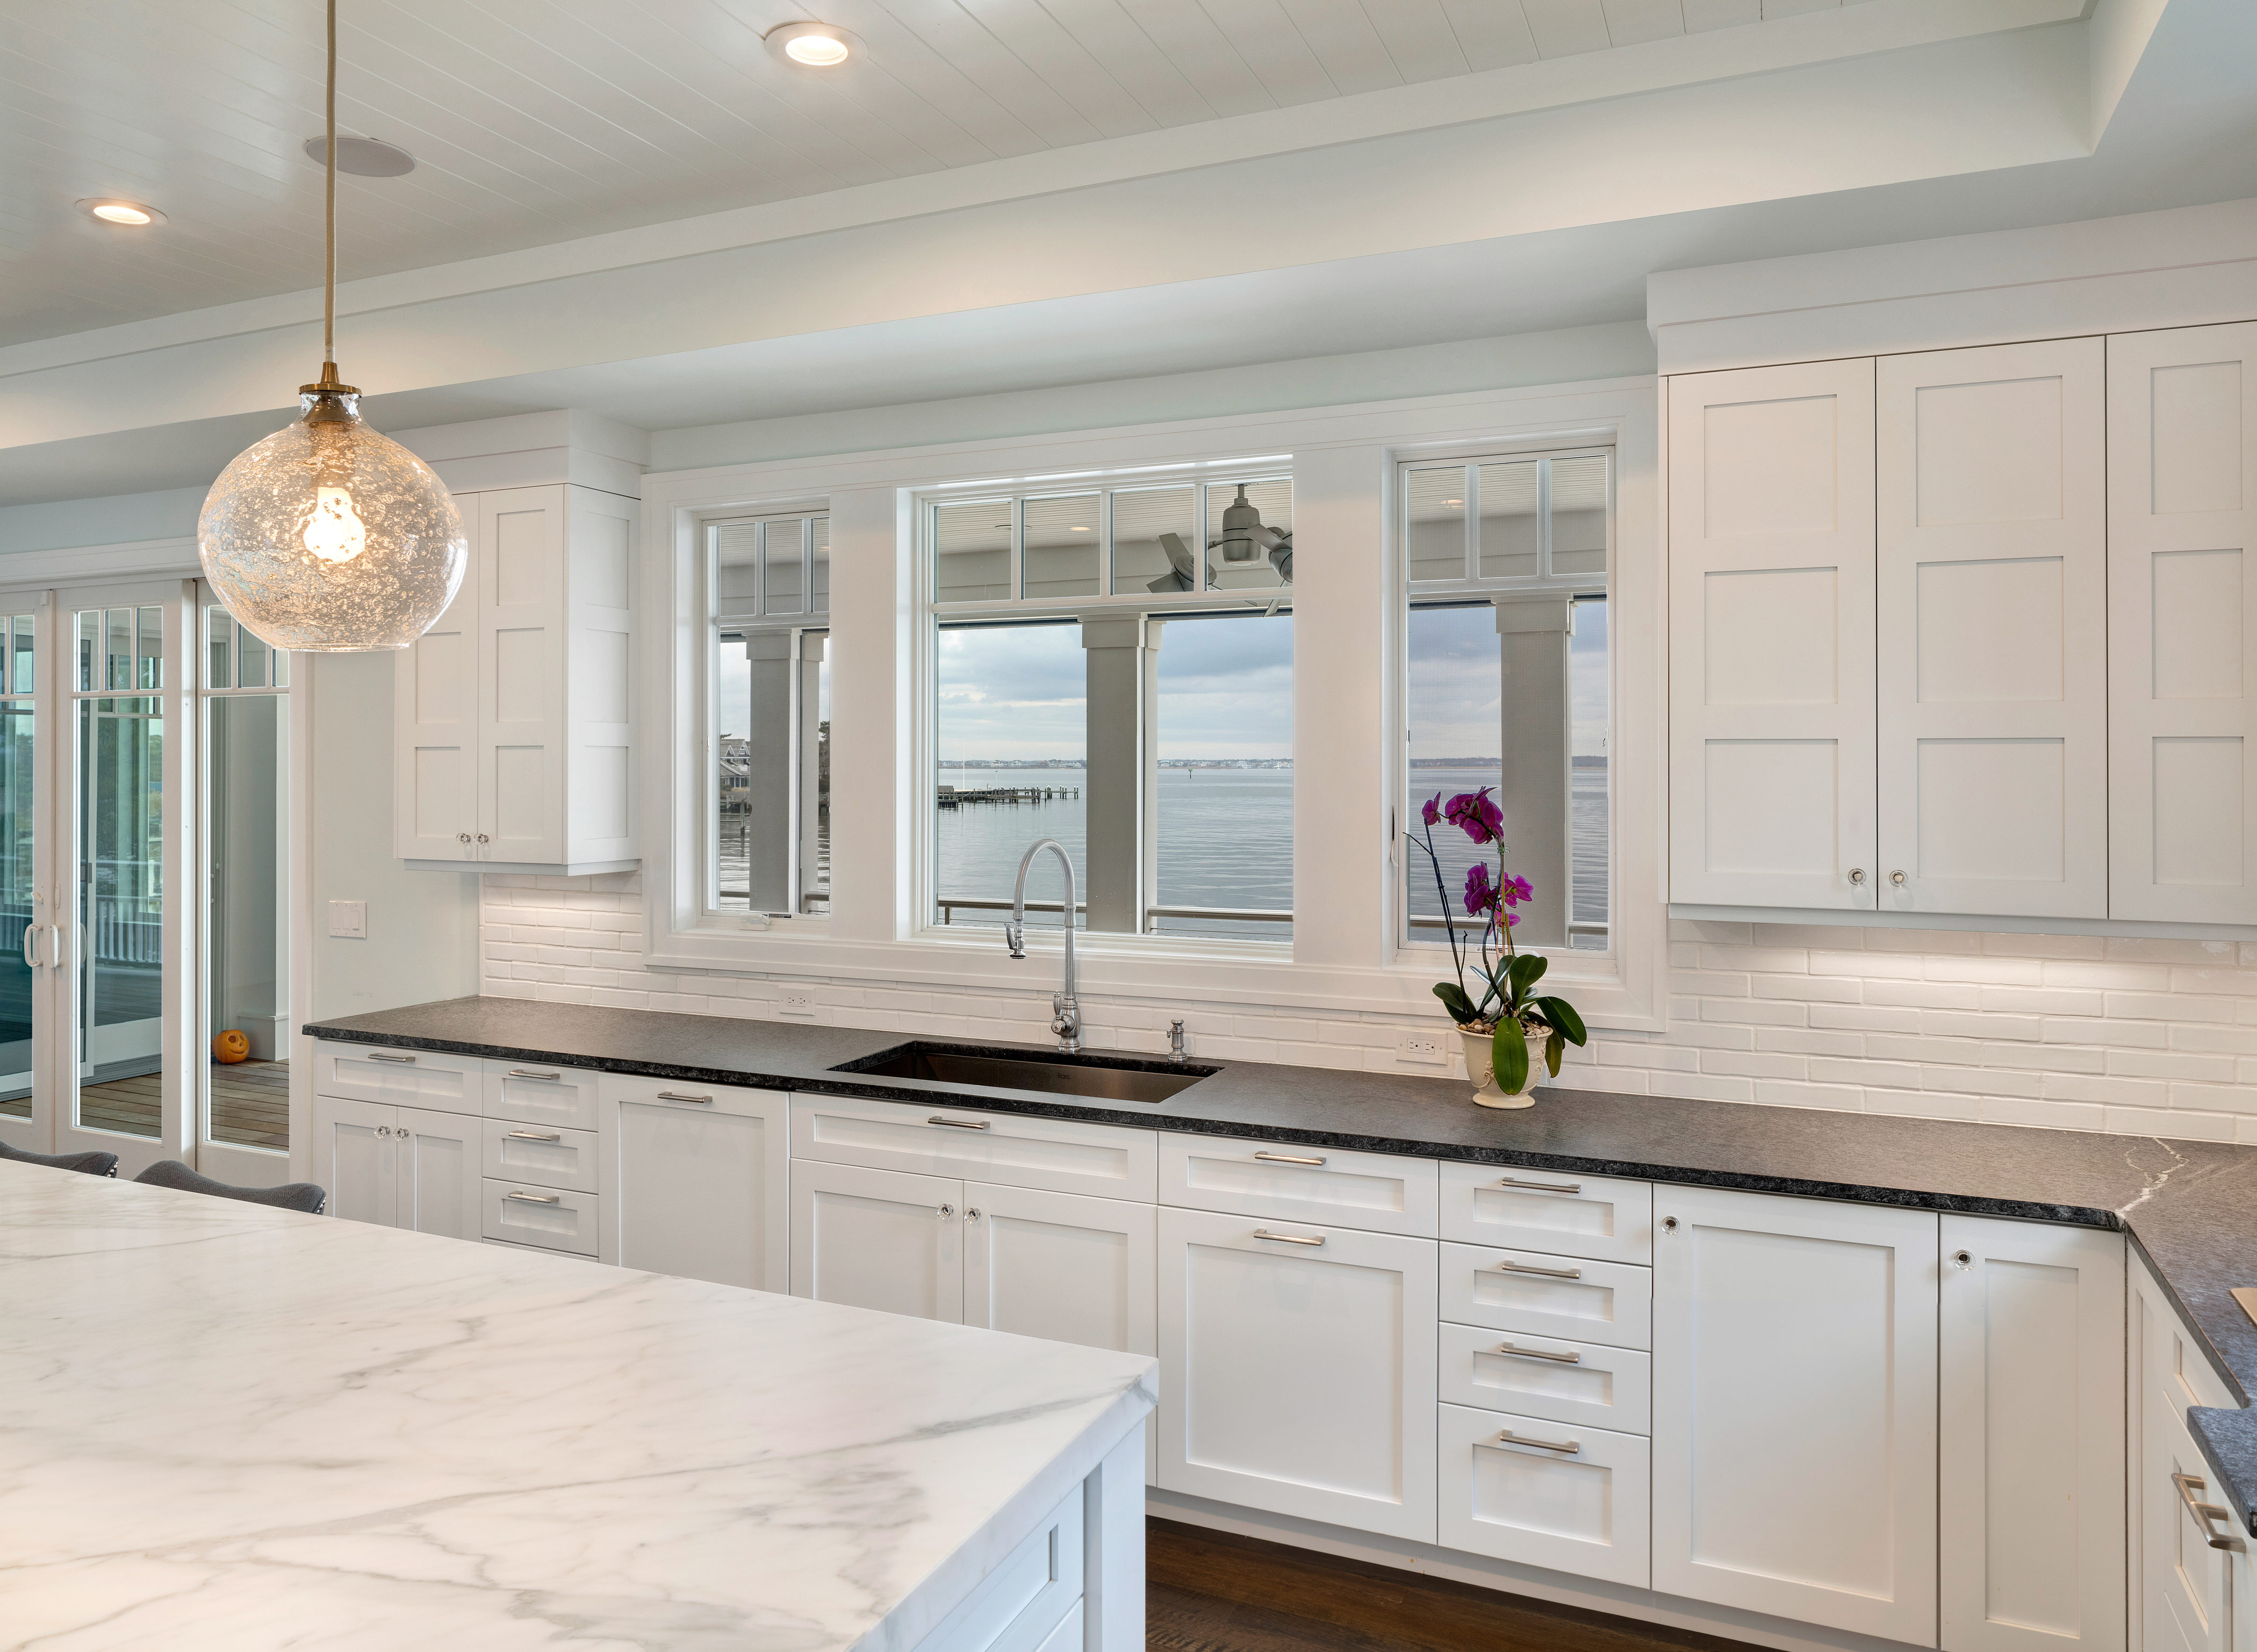 Pictures Of White Kitchen Cabinet Designs - Image to u